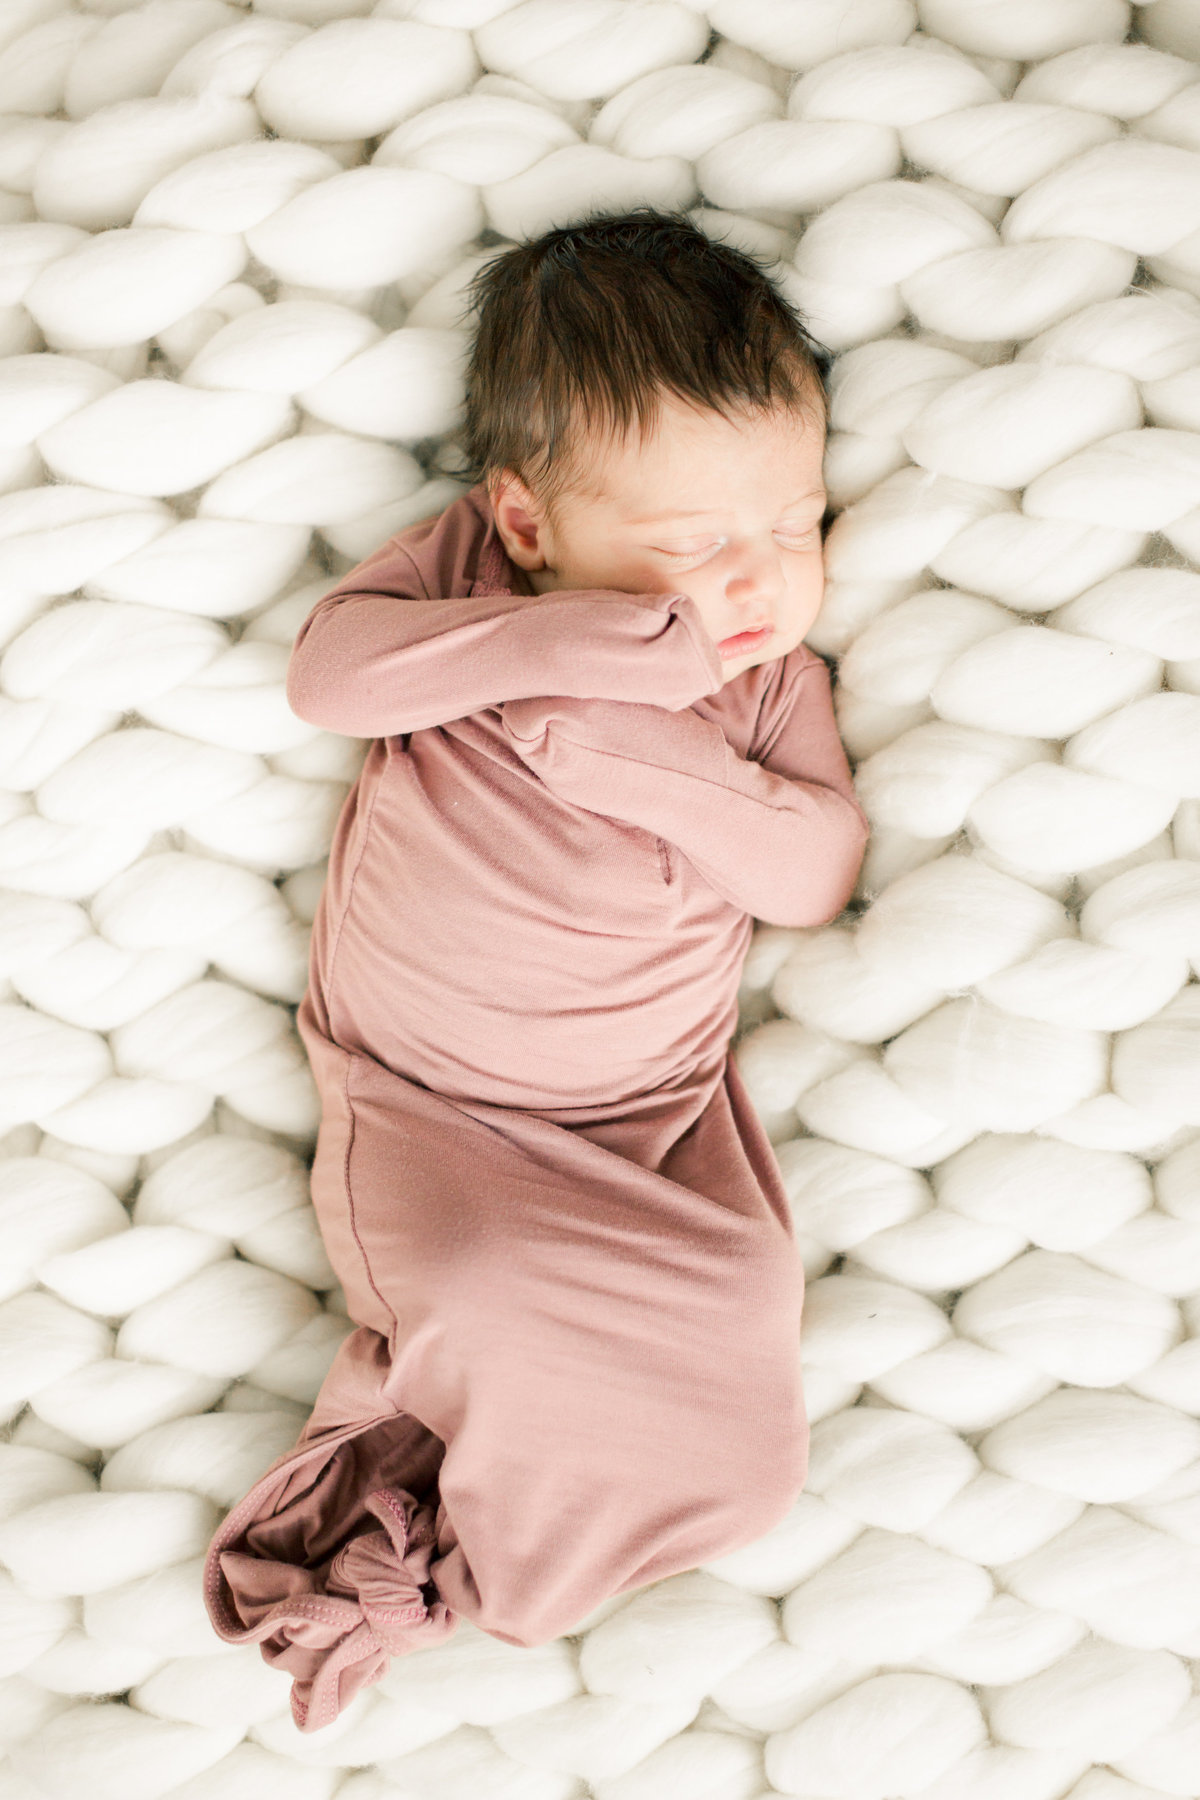 baby lays on chunky white wool blanket for newborn portraits